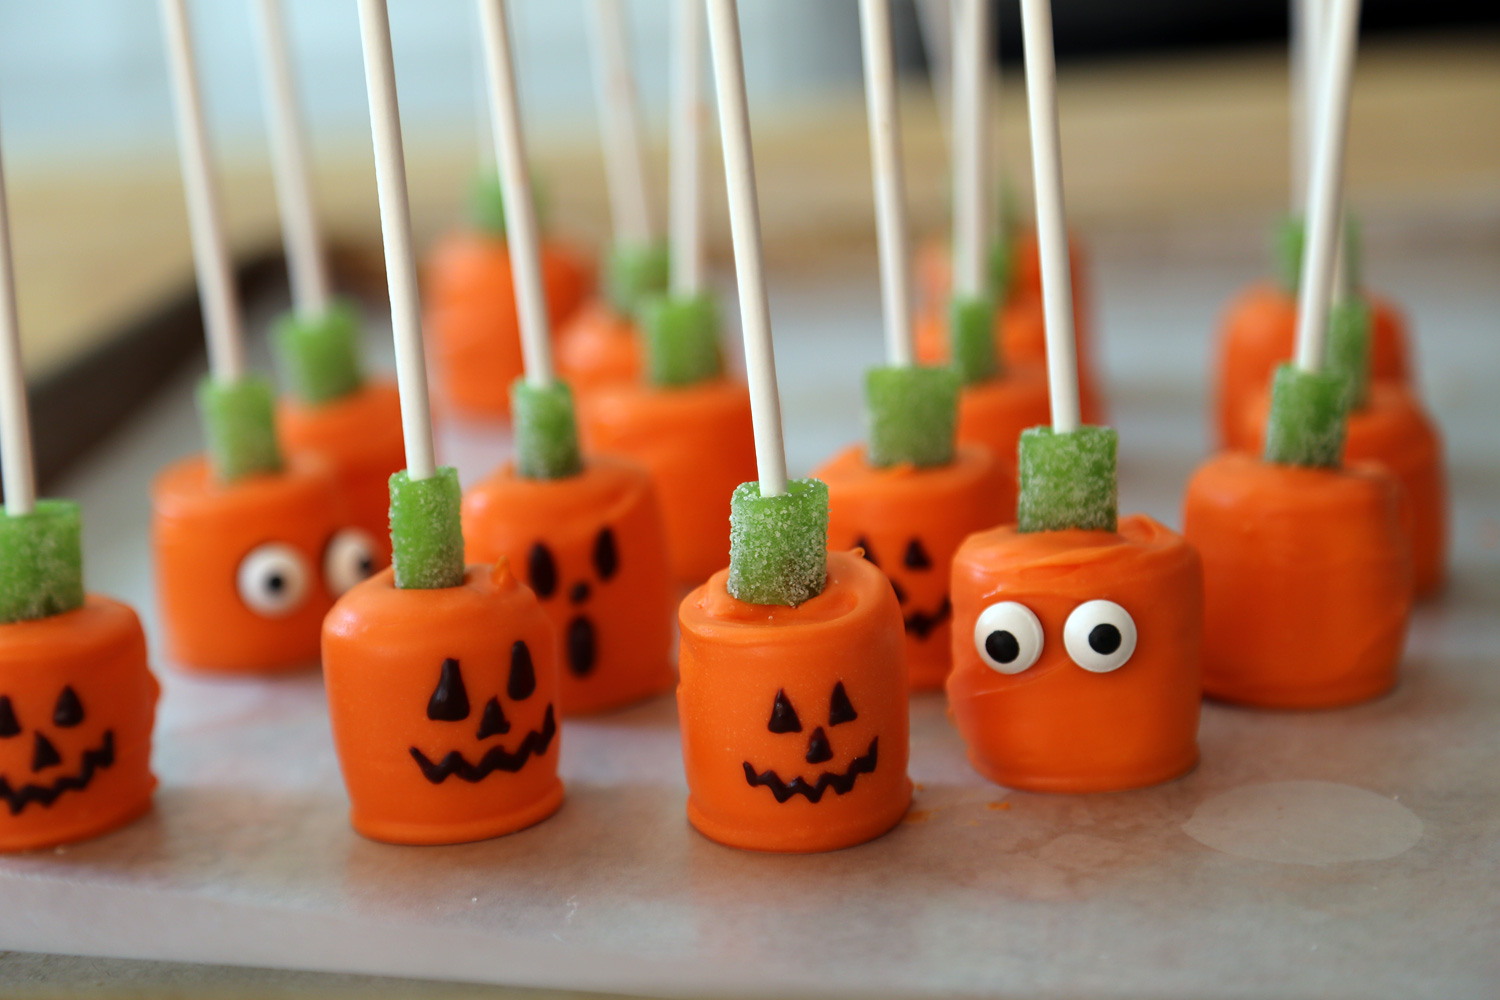 Alternatively, put a blob of chocolate on the pumpkins and add candy eyeballs.